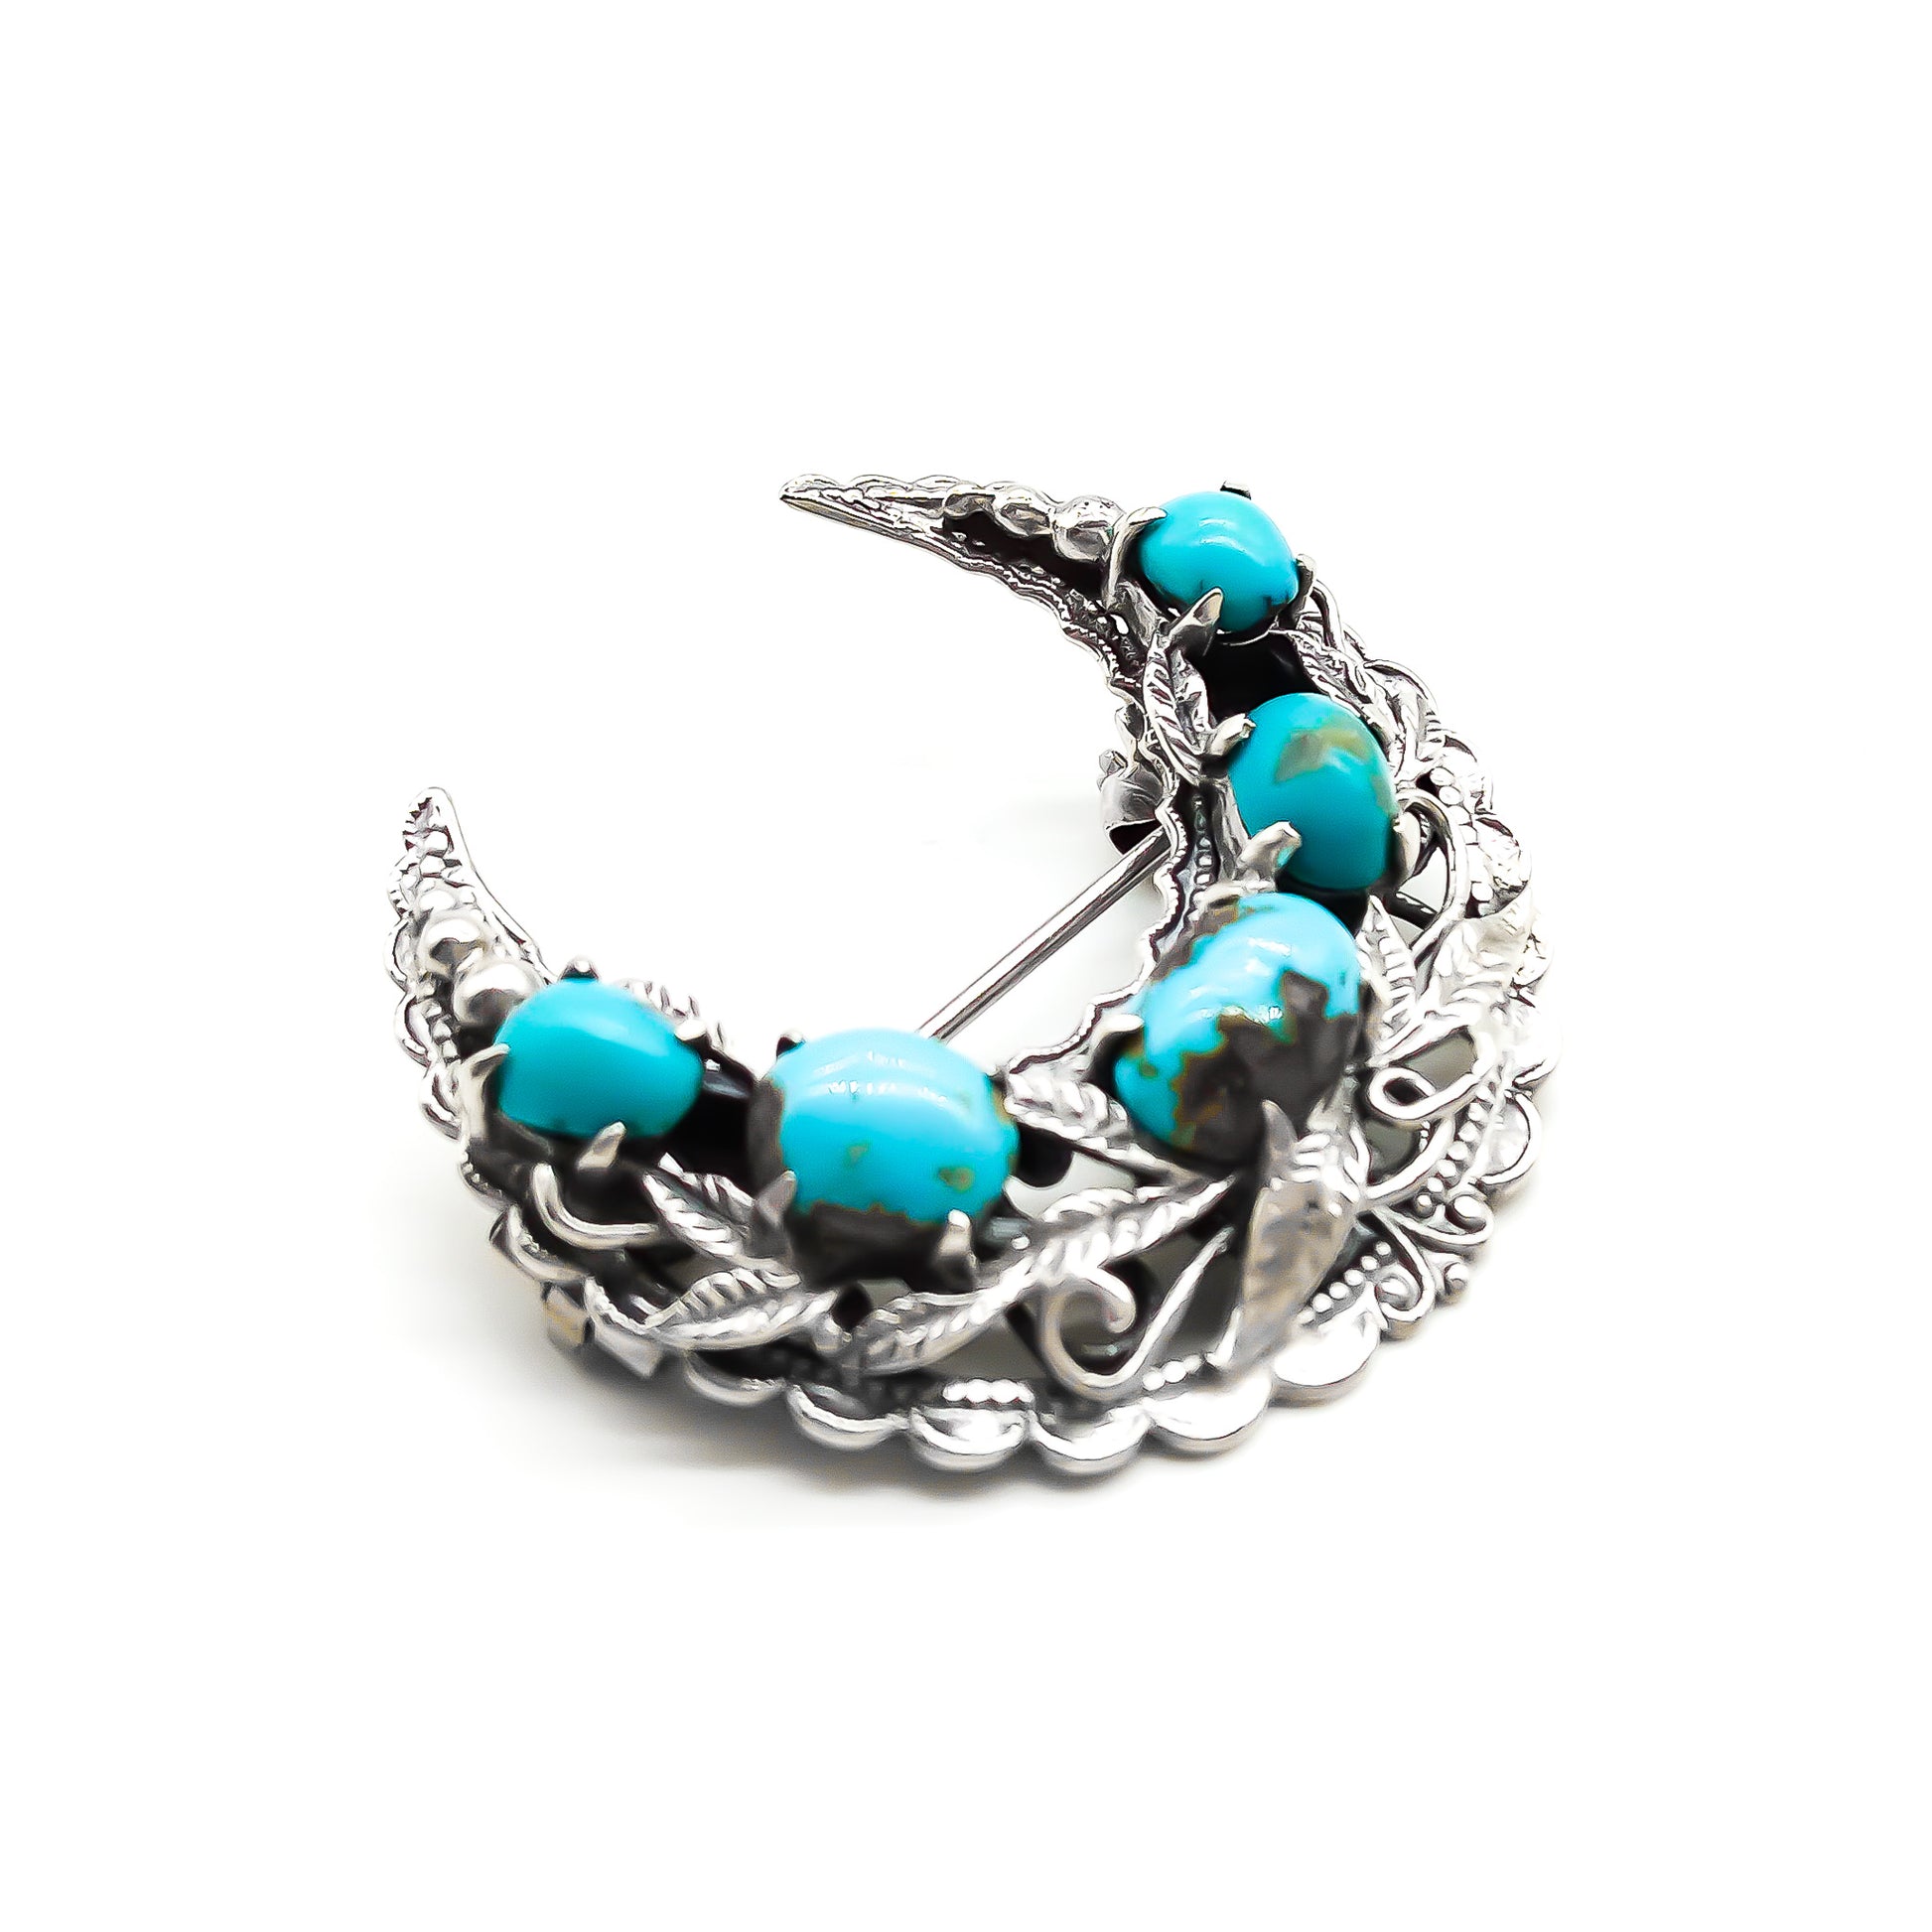 Ornate silver crescent brooch set with five oval turquoise stones. Circa 1930’s